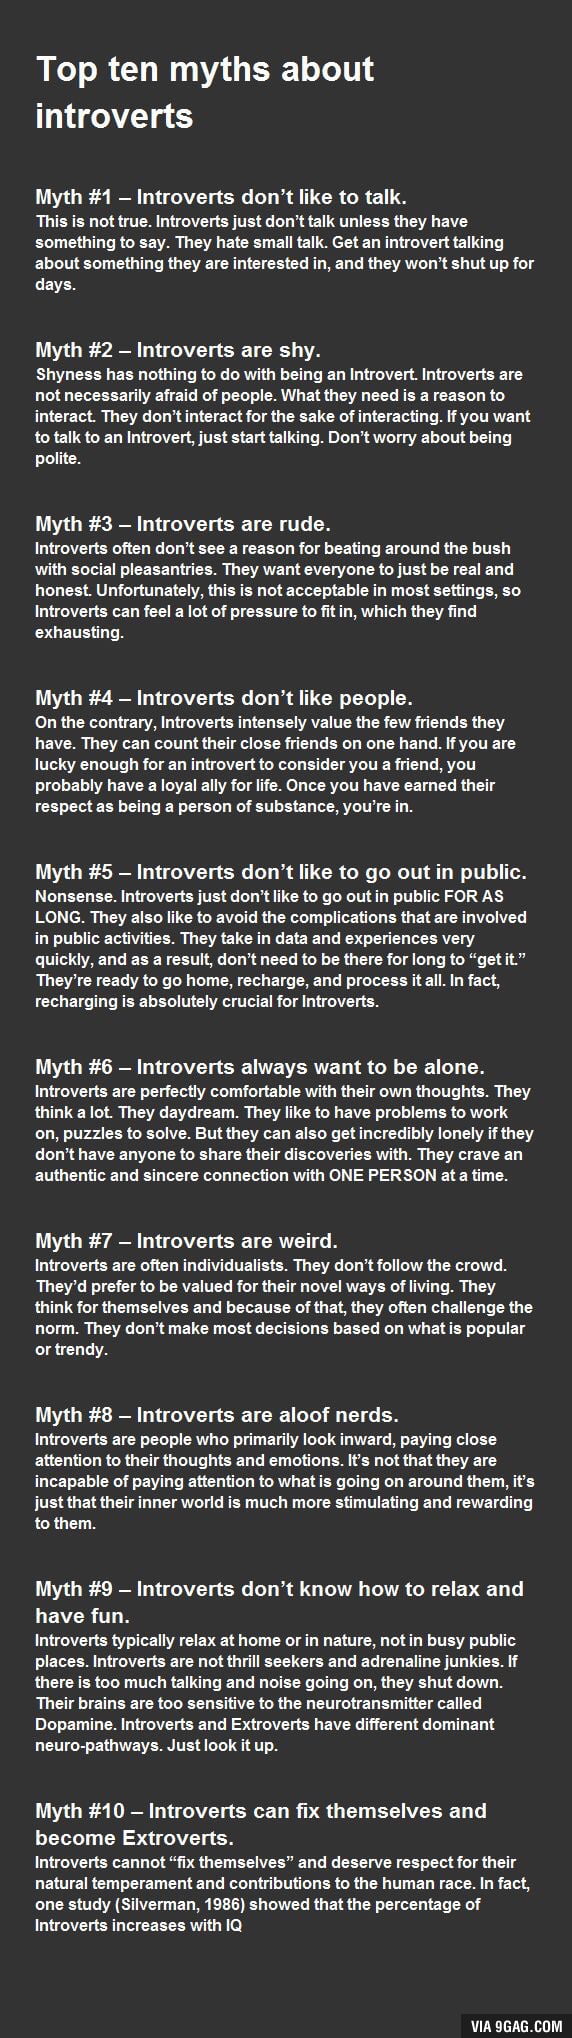 Top 10 Myths About Introverts - 9GAG